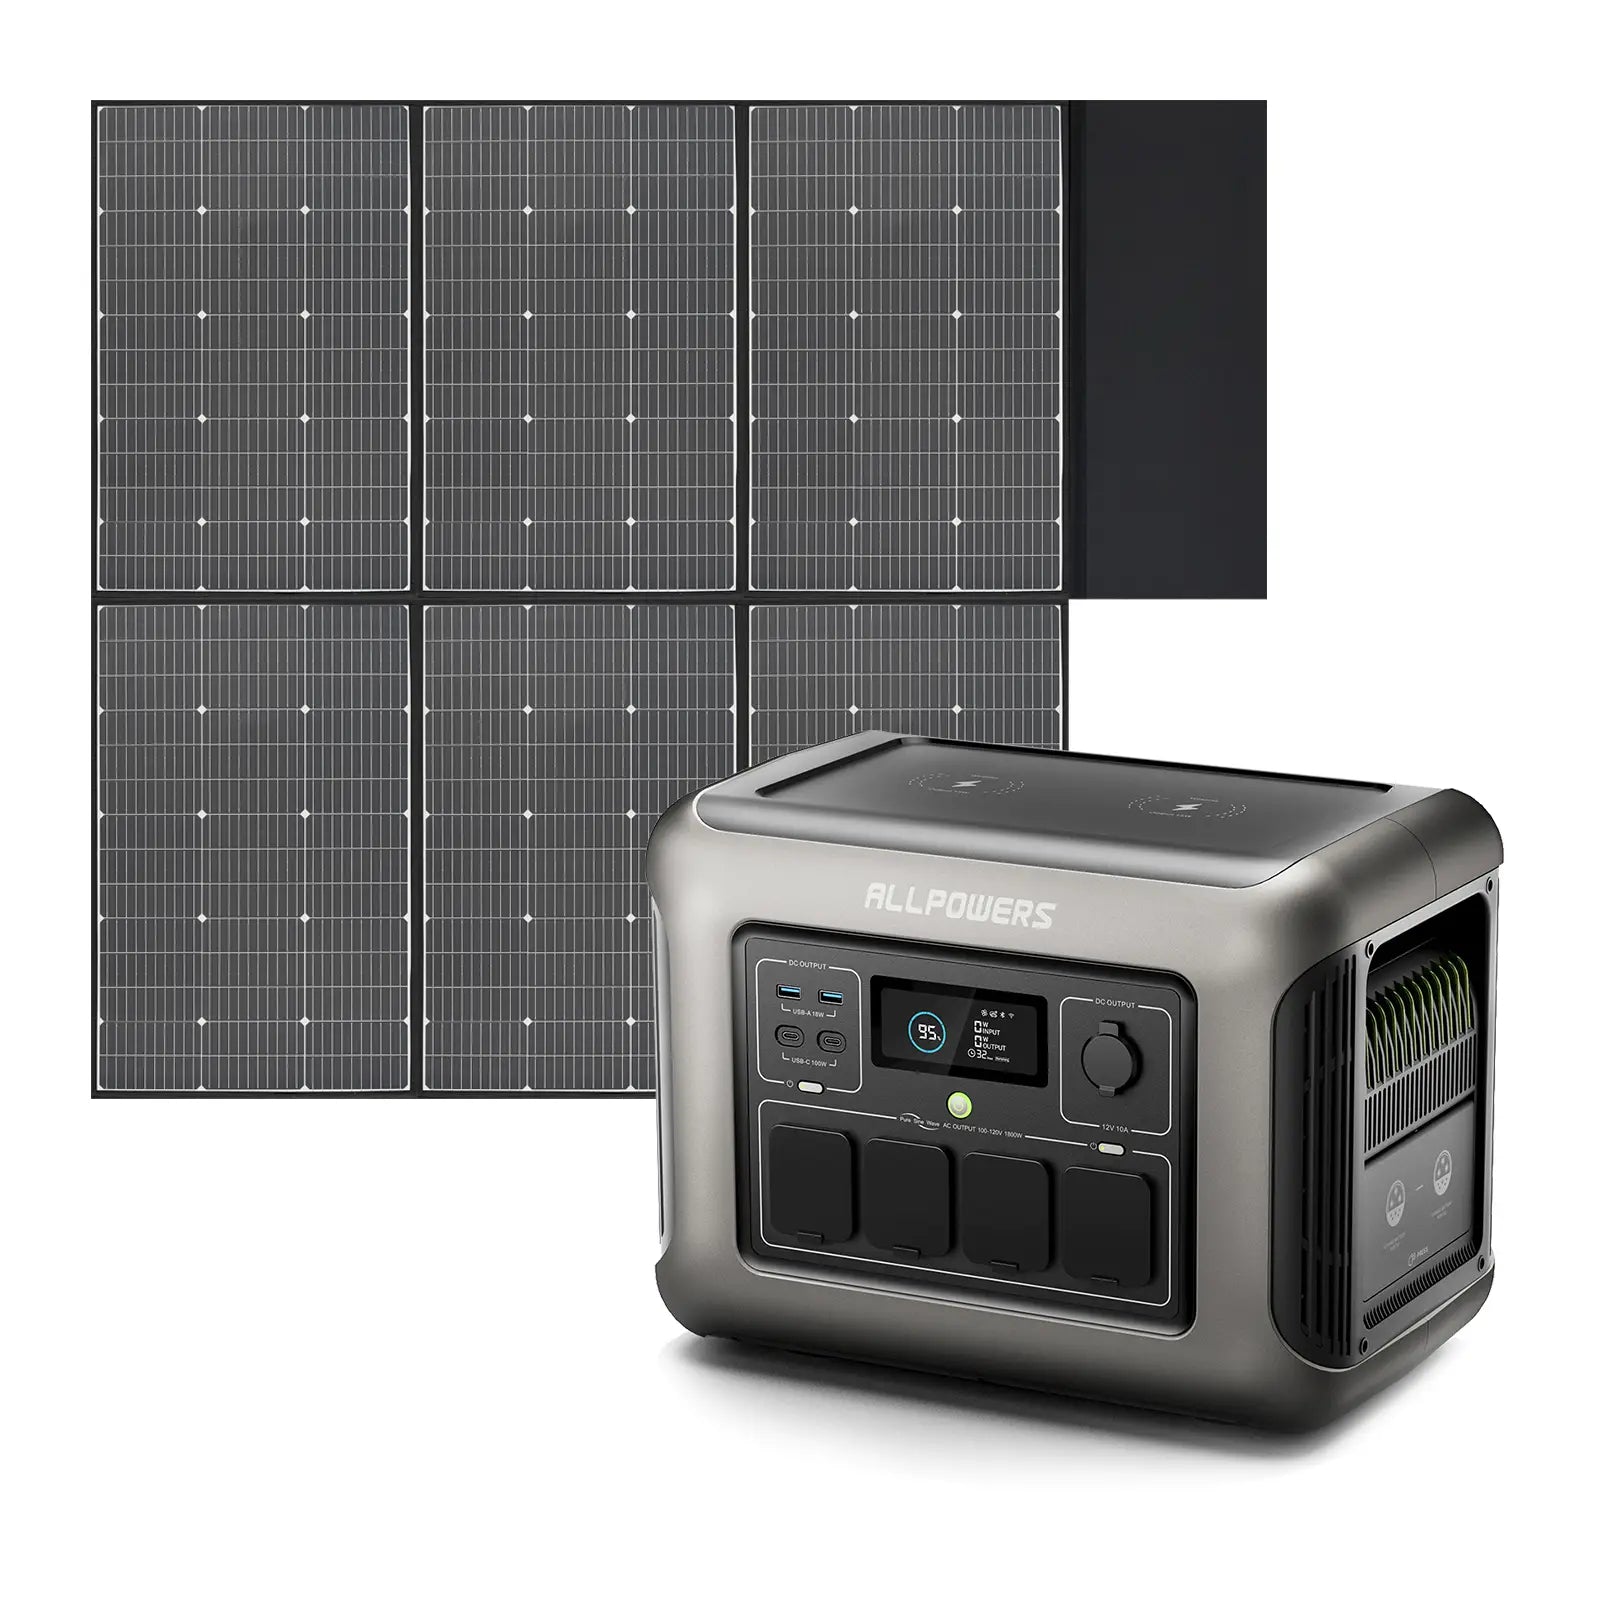 ALLPOWERS R1500 Portable Home Backup Power Station 1800W 1152Wh LiFeP04 Battery(R1500 + SP039 600W Solar Panel)